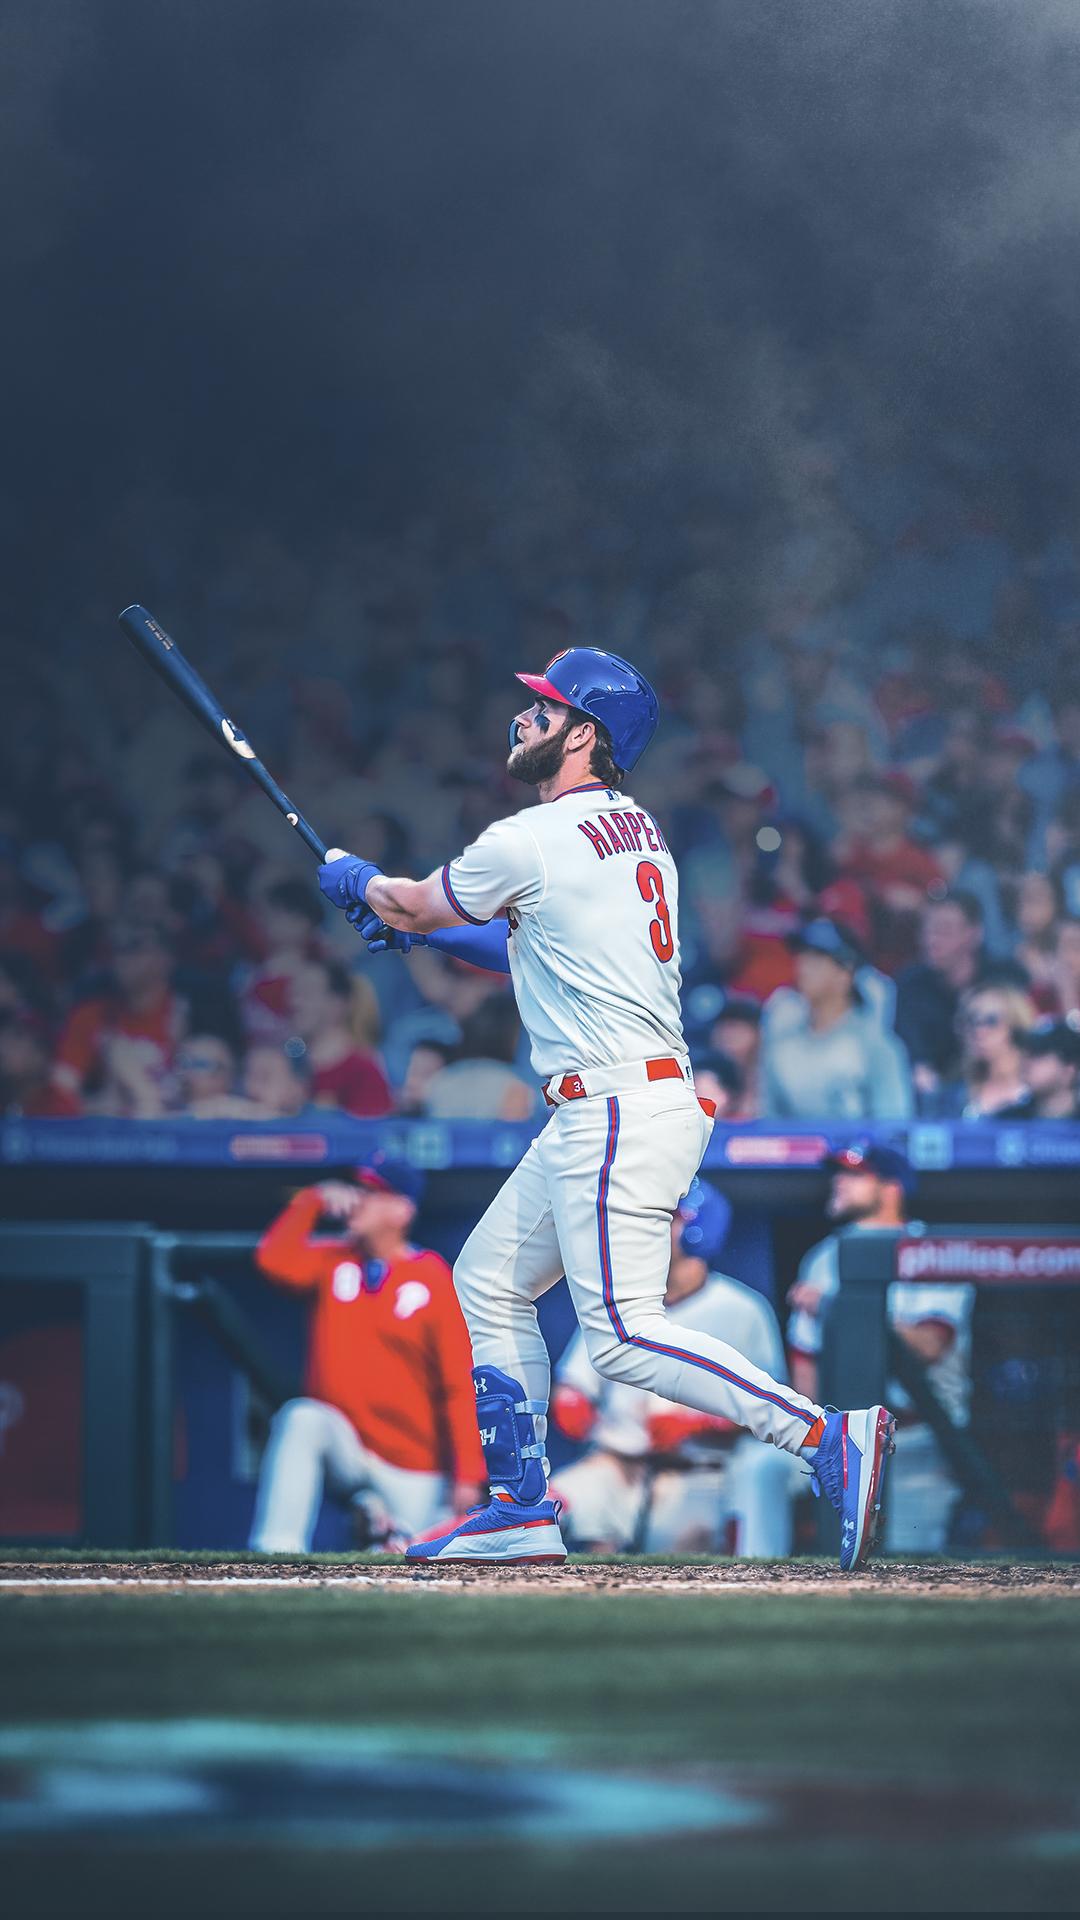 Phillies Phone Wallpapers on WallpaperDog